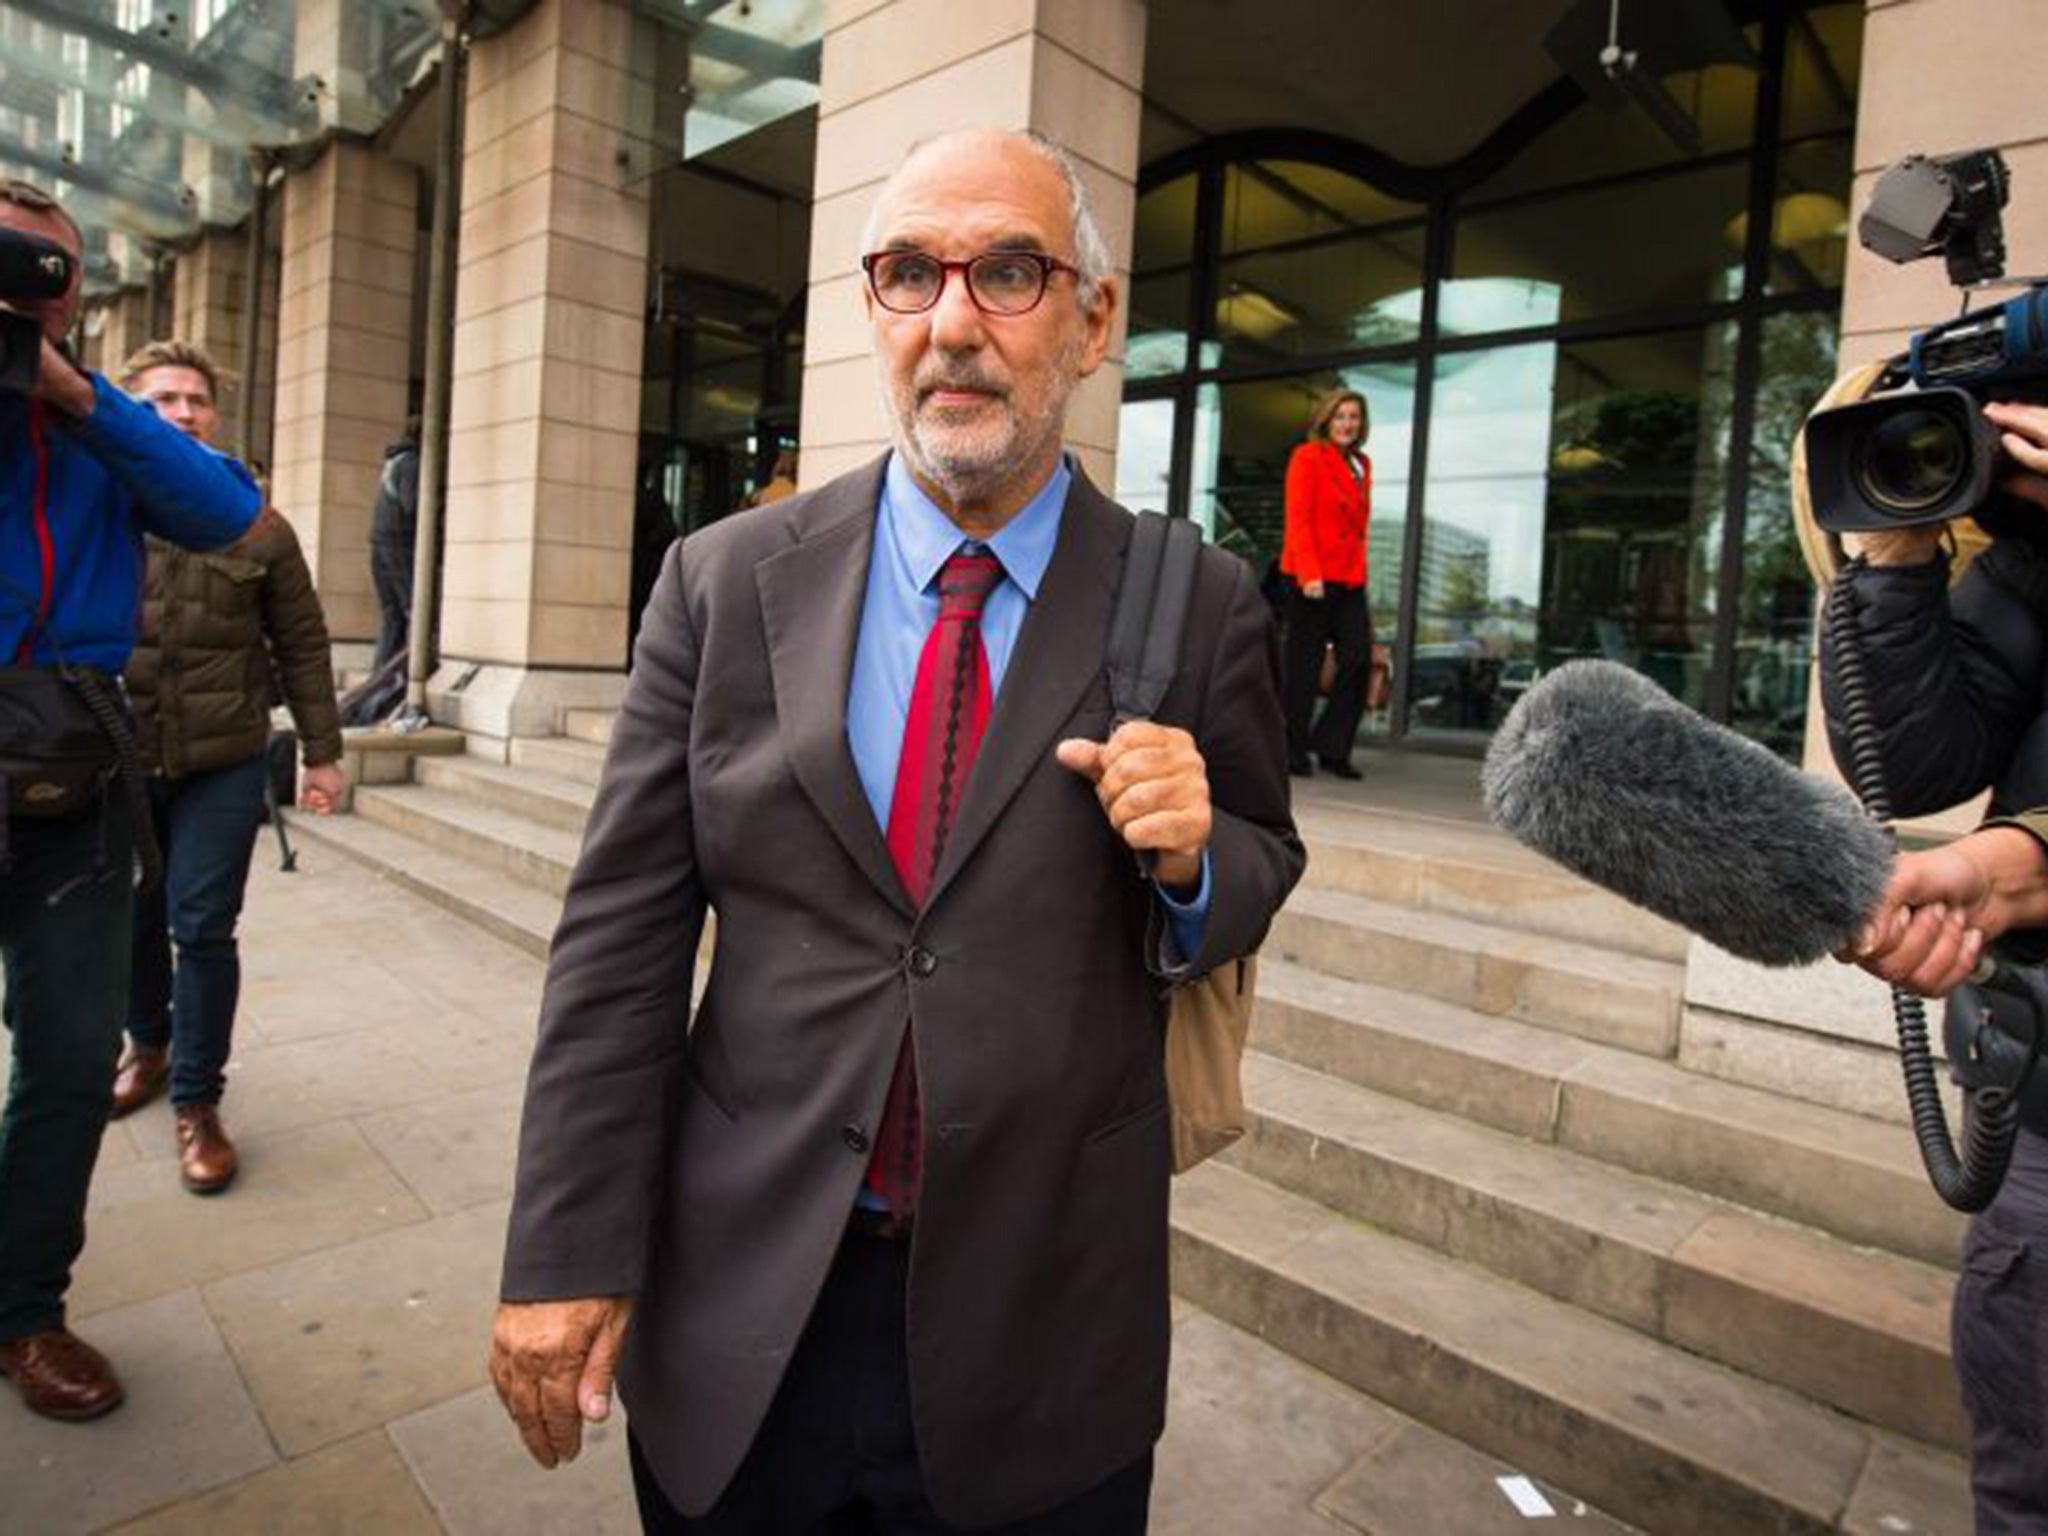 Alan Yentob, leaves Portcullis house after giving evidence on Kids Company to the Commons Public Administration Committee